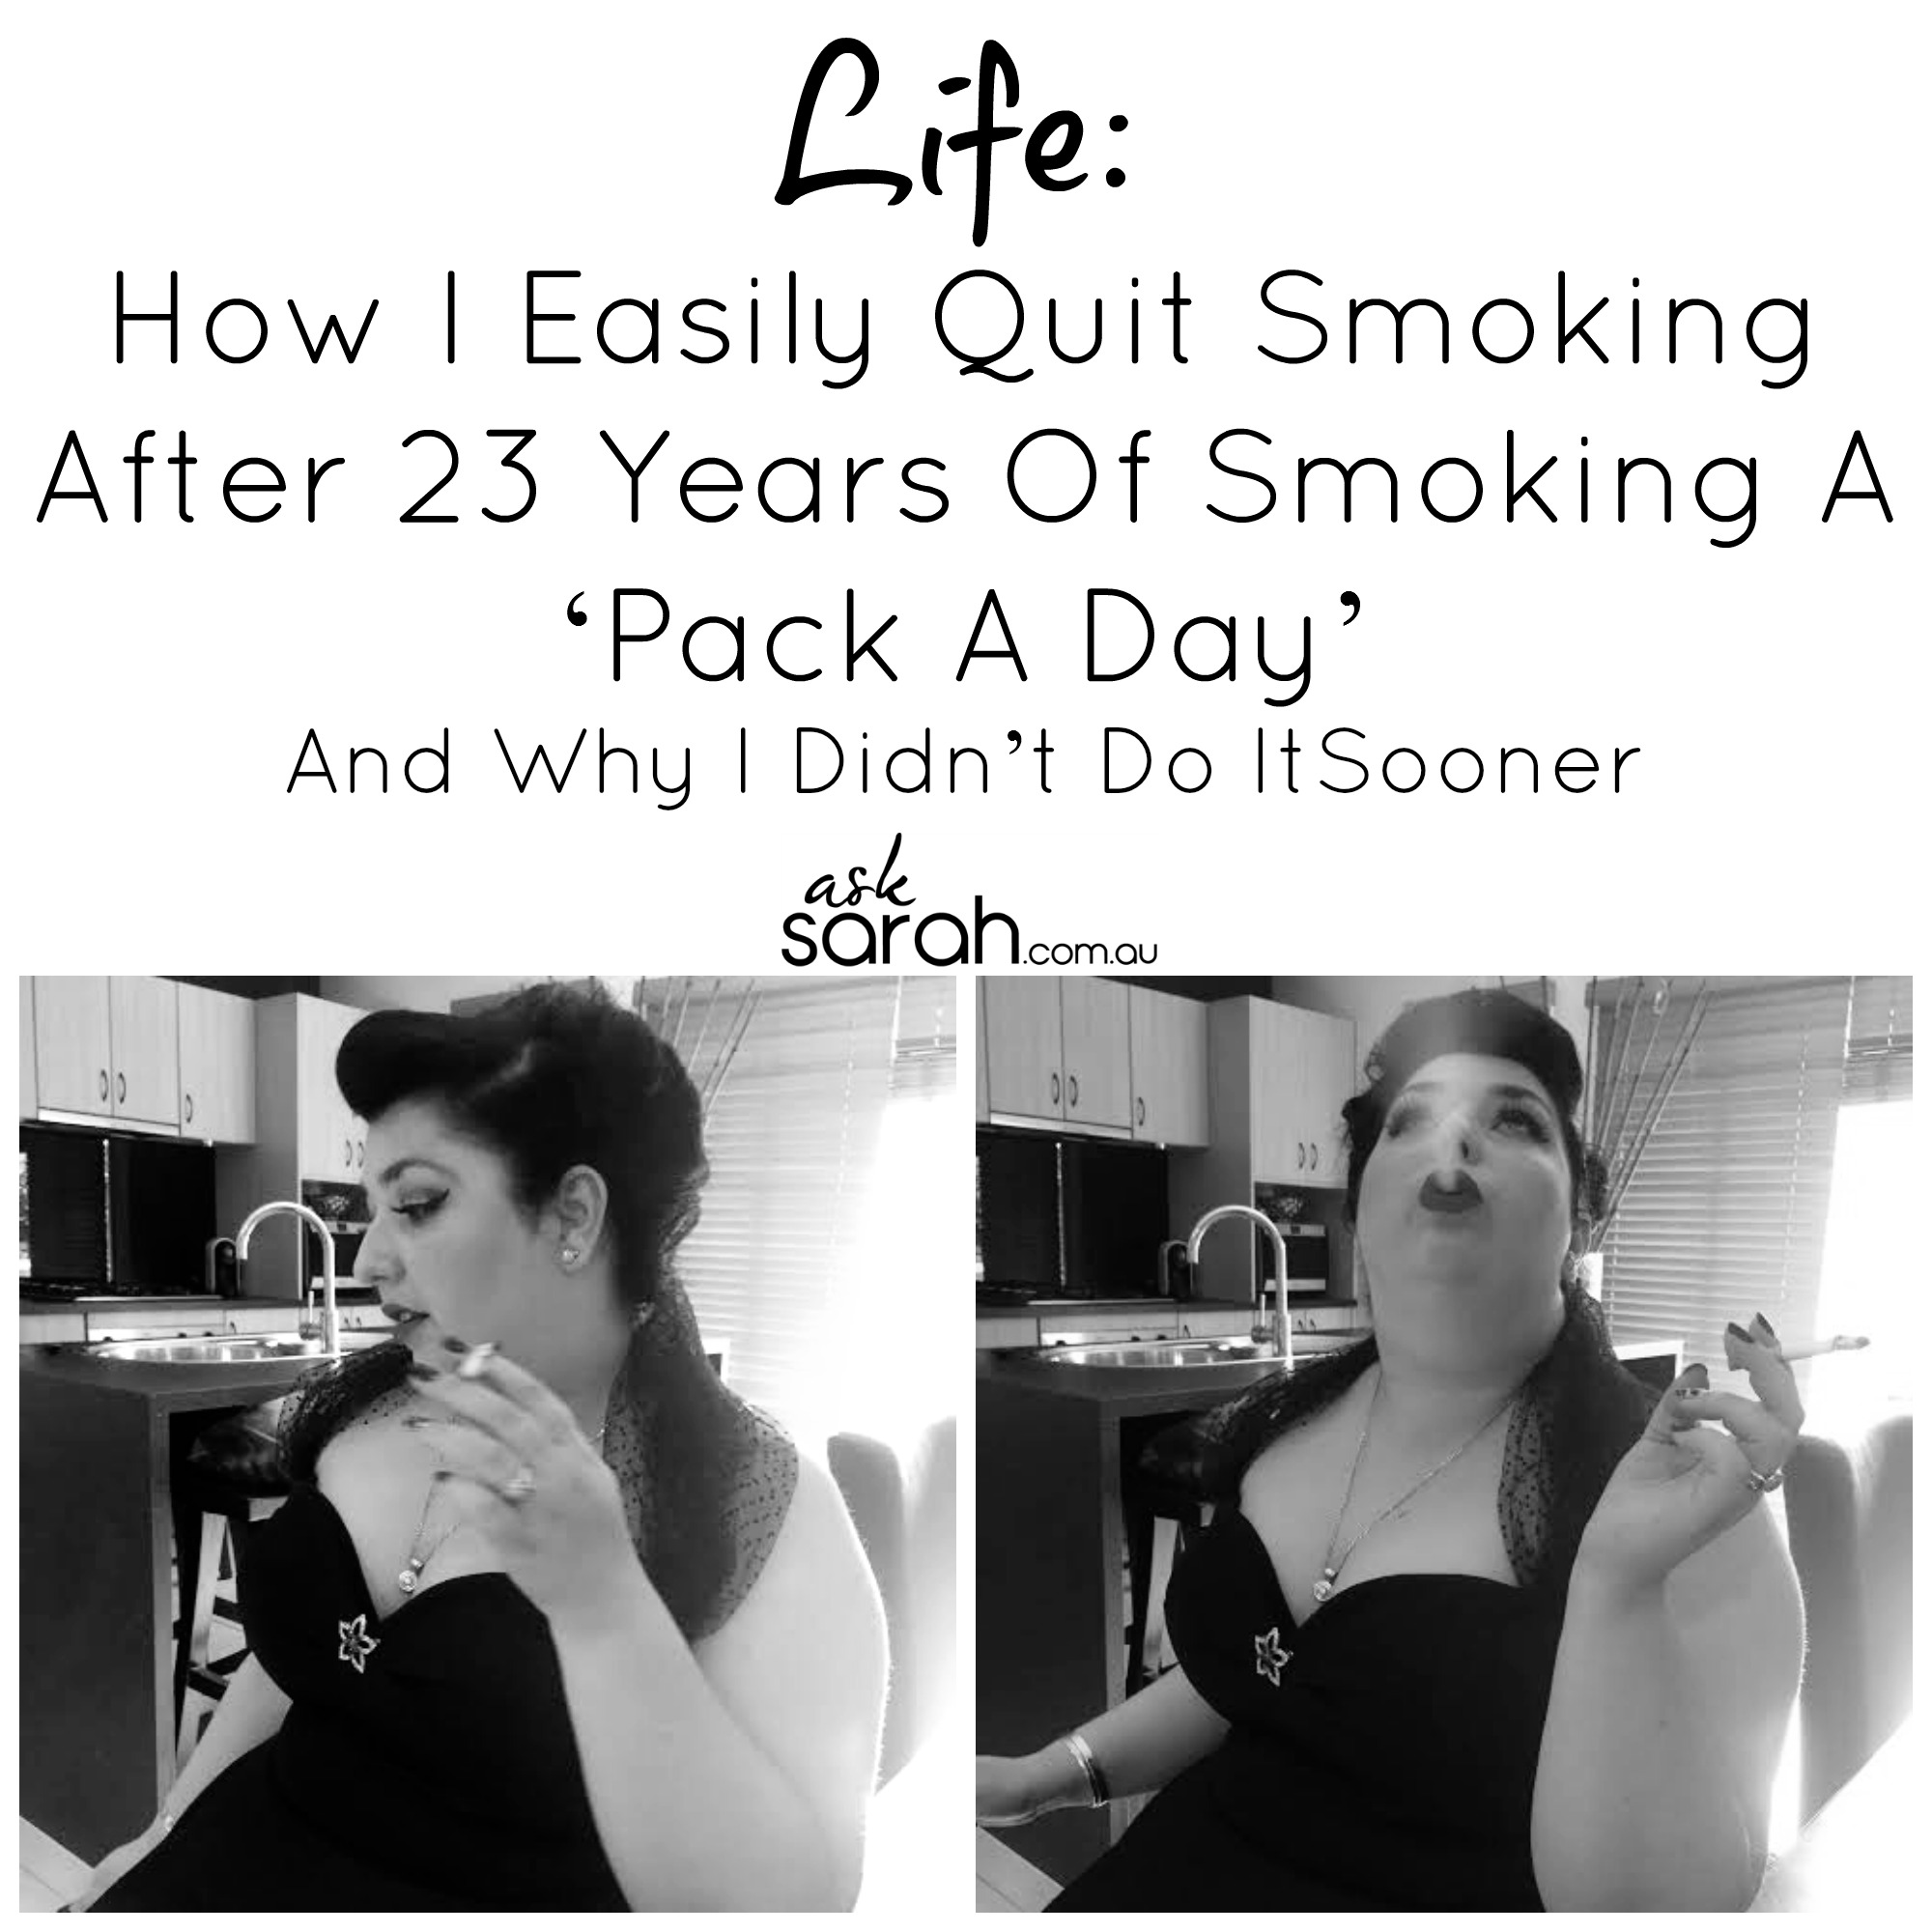 How I Easily Quit Smoking After 23 Years Of Smoking A ‘Pack A Day’ And Why I Didn’t Do It Sooner